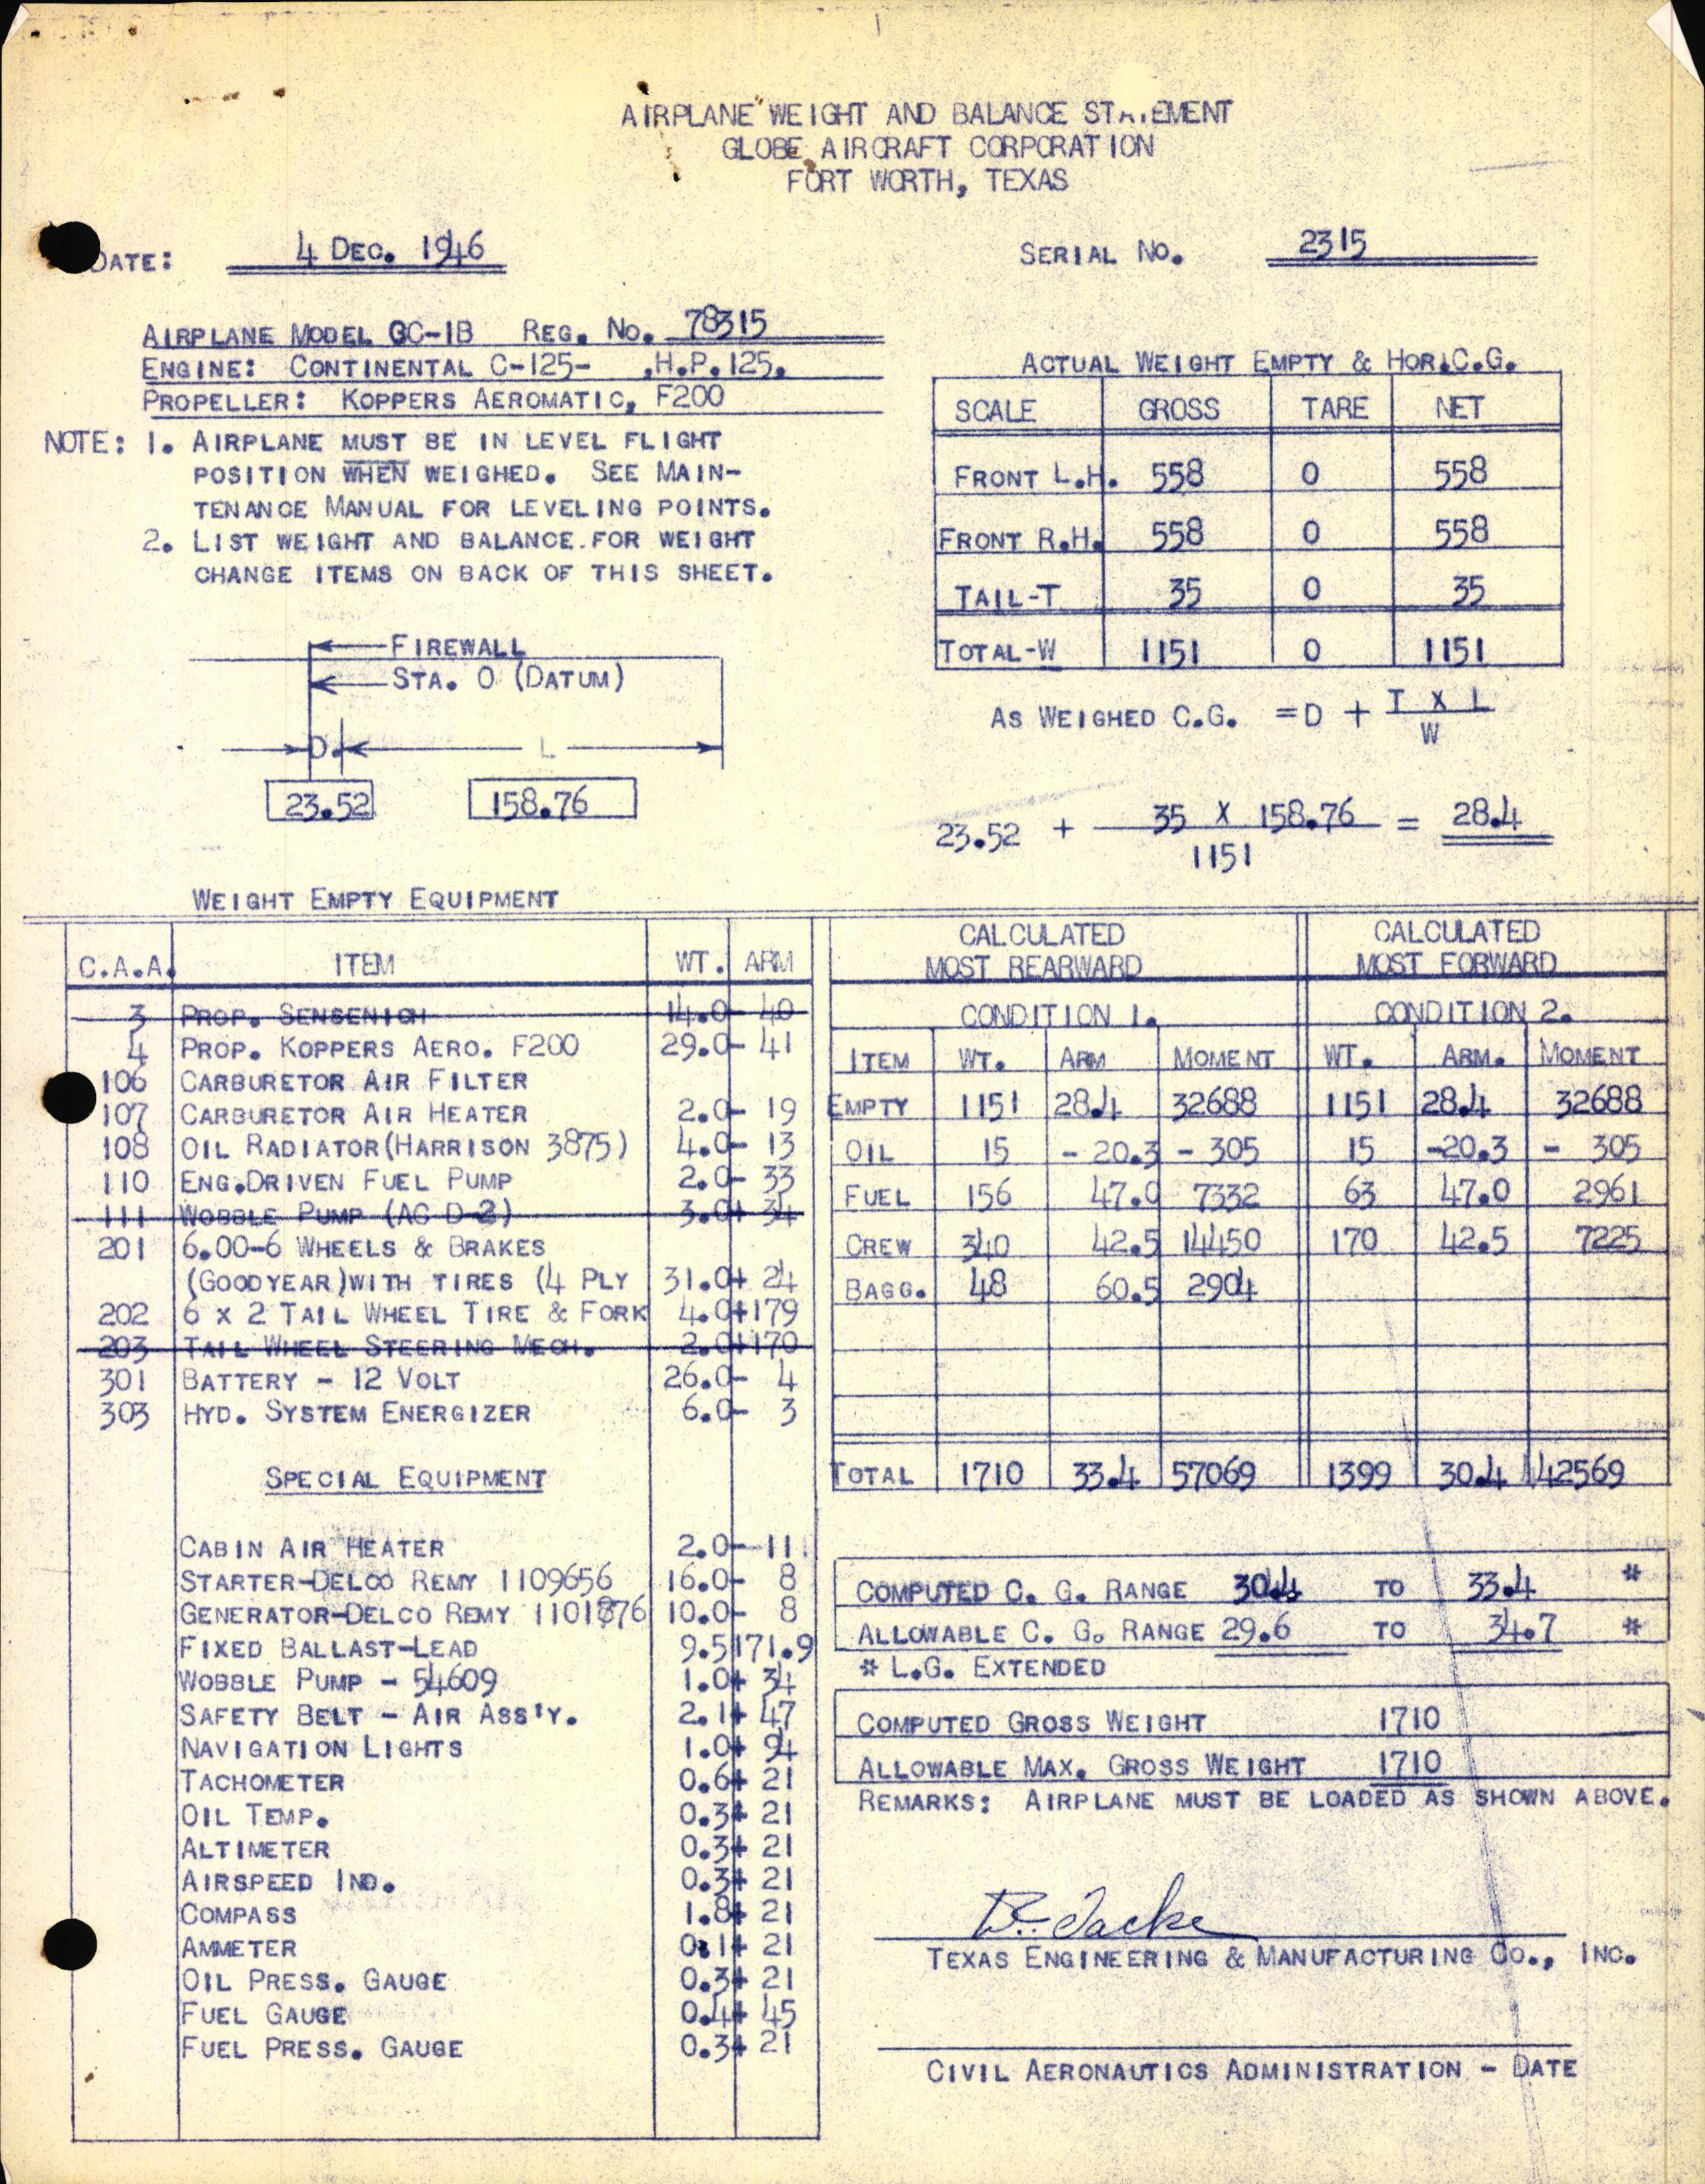 Sample page 3 from AirCorps Library document: Technical Information for Serial Number 2315